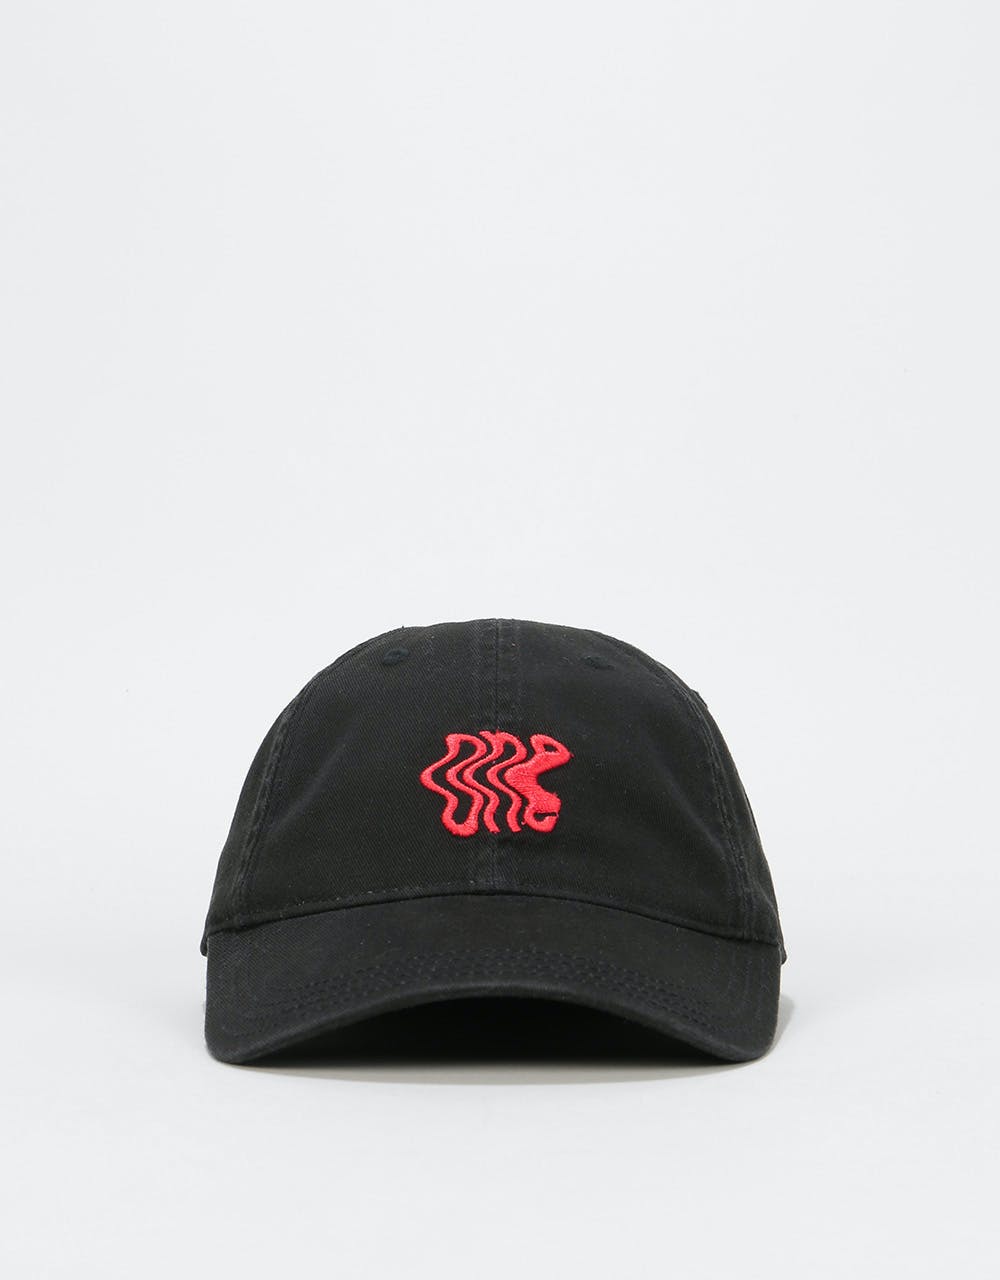 Route One Distorted Cap - Black